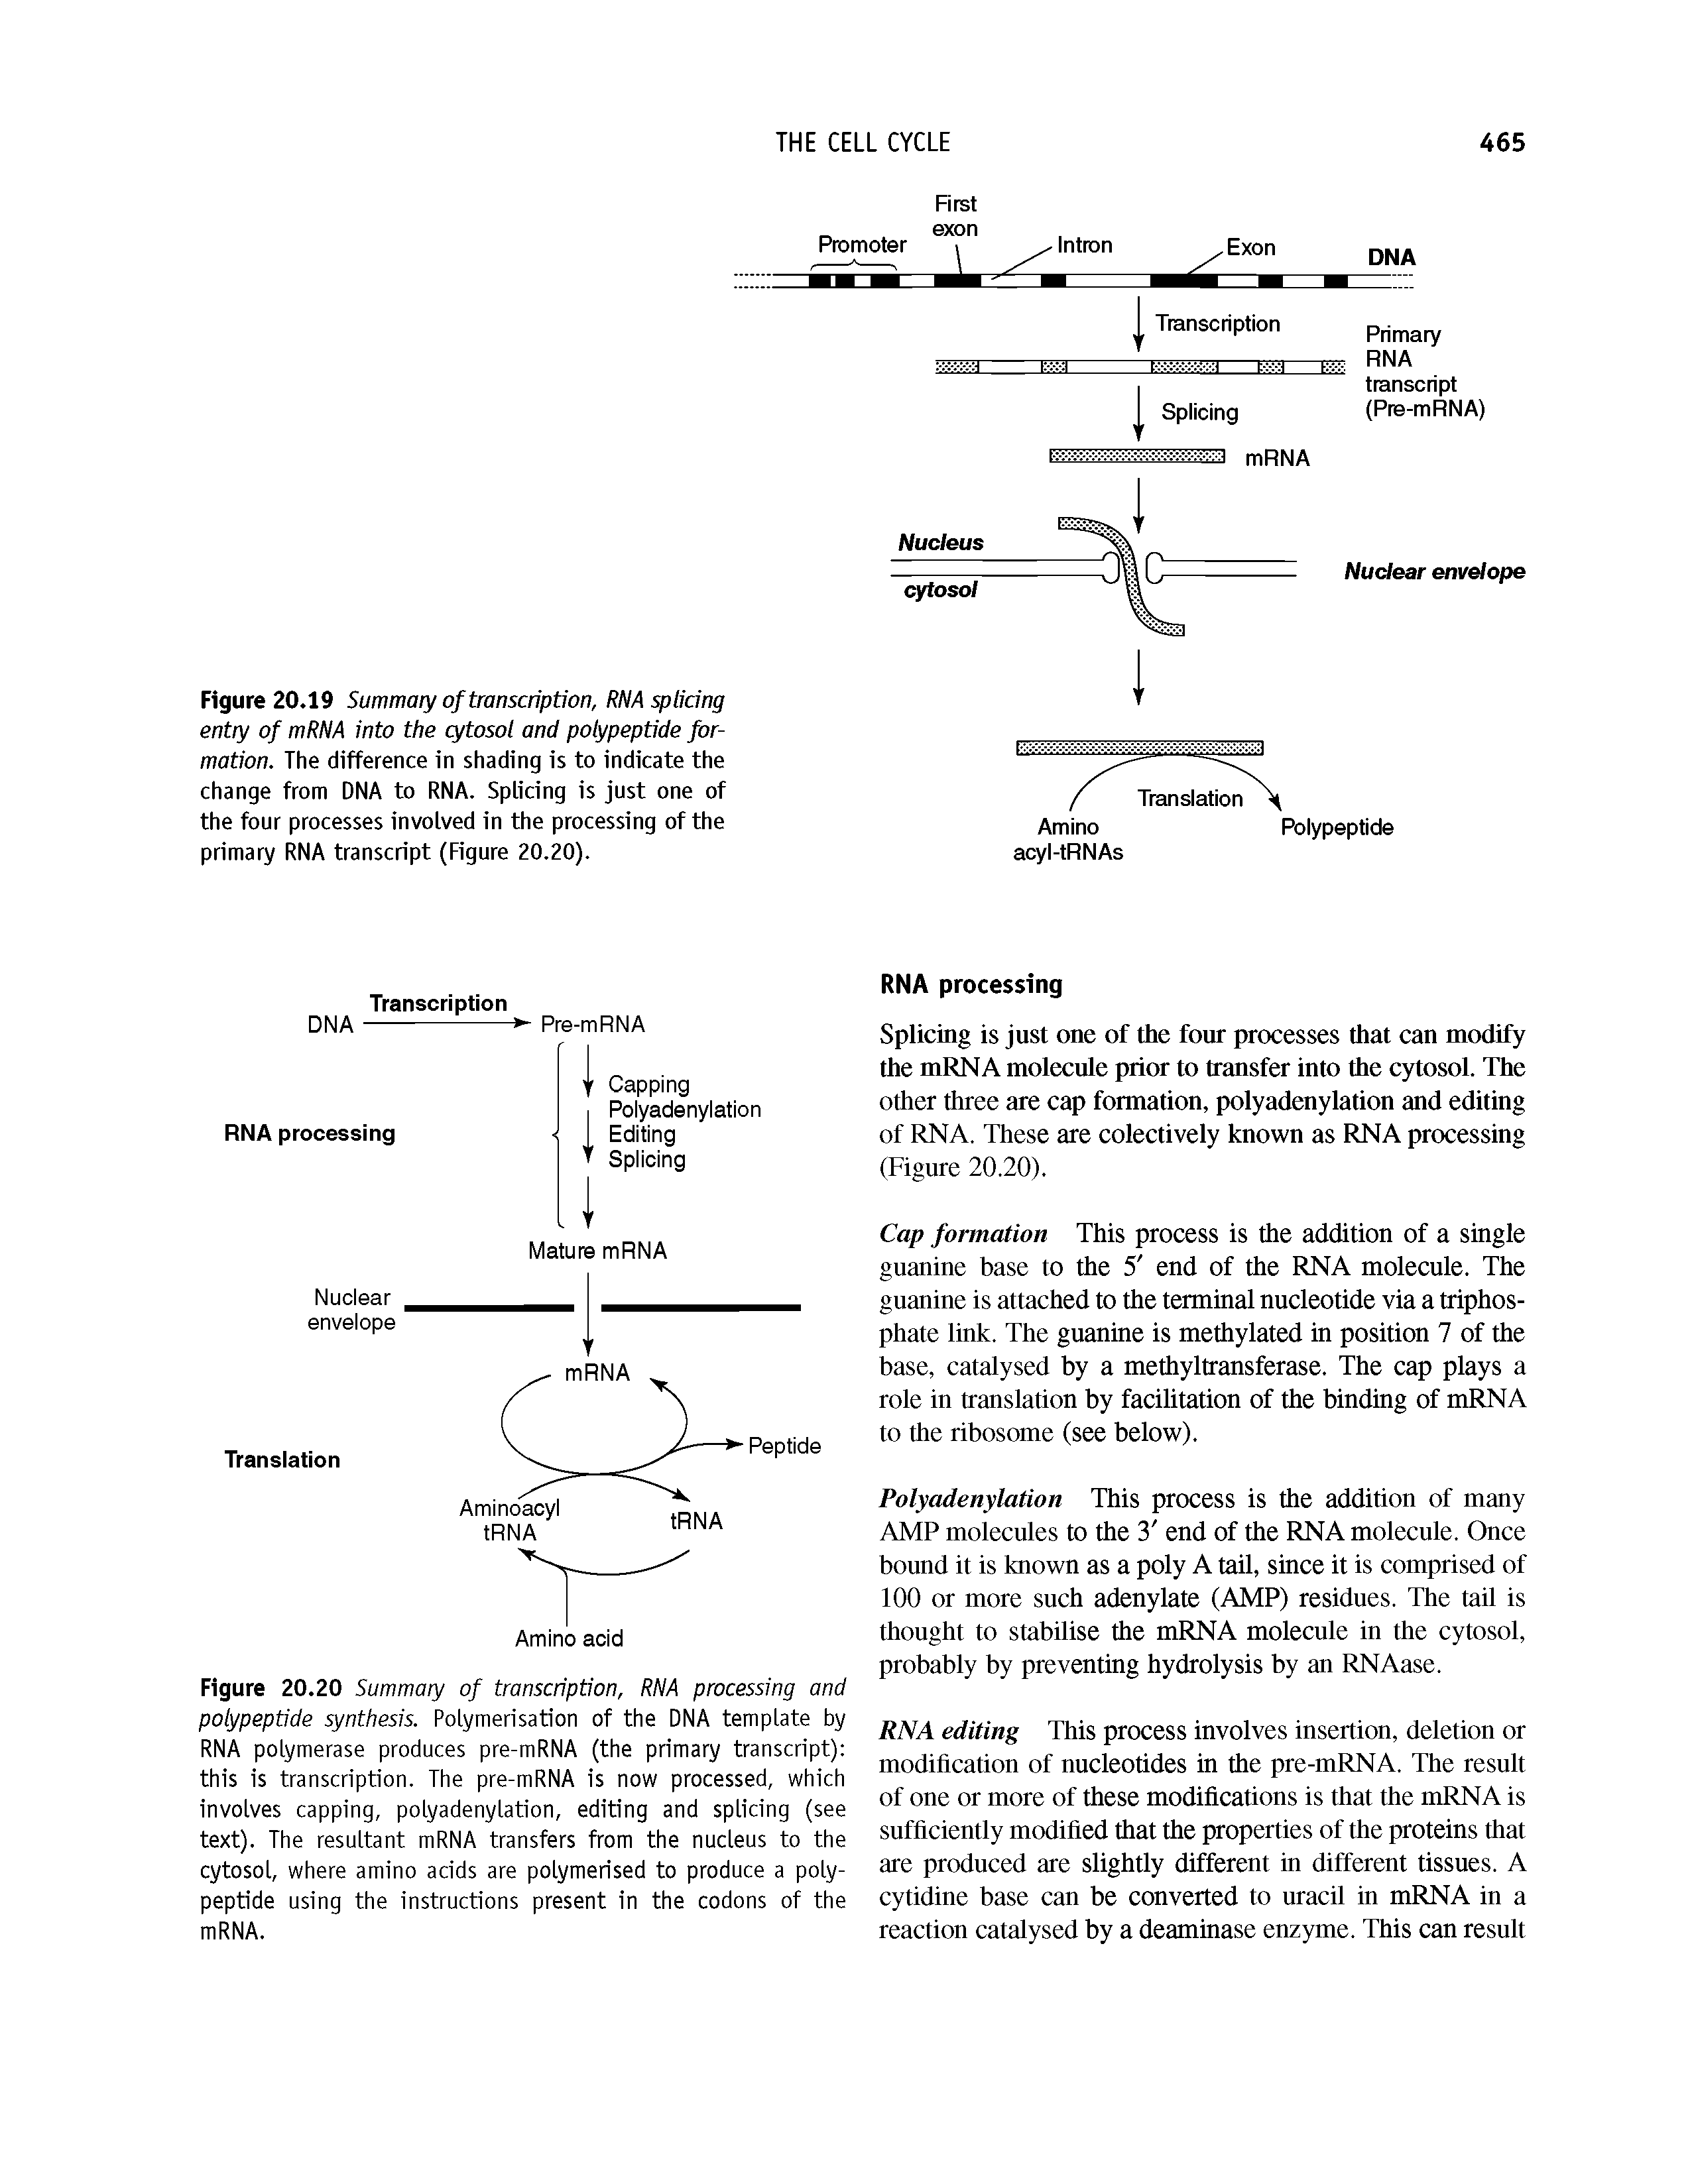 Figure 20.20 Summary of transcription, RNA processing and polypeptide synthesis. Polymerisation of the DNA template by RNA polymerase produces pre-mRNA (the primary transcript) this is transcription. The pre-mRNA is now processed, which involves capping, polyadenylation, editing and splicing (see text). The resultant mRNA transfers from the nucleus to the cytosol, where amino acids are polymerised to produce a polypeptide using the instructions present in the codons of the mRNA.